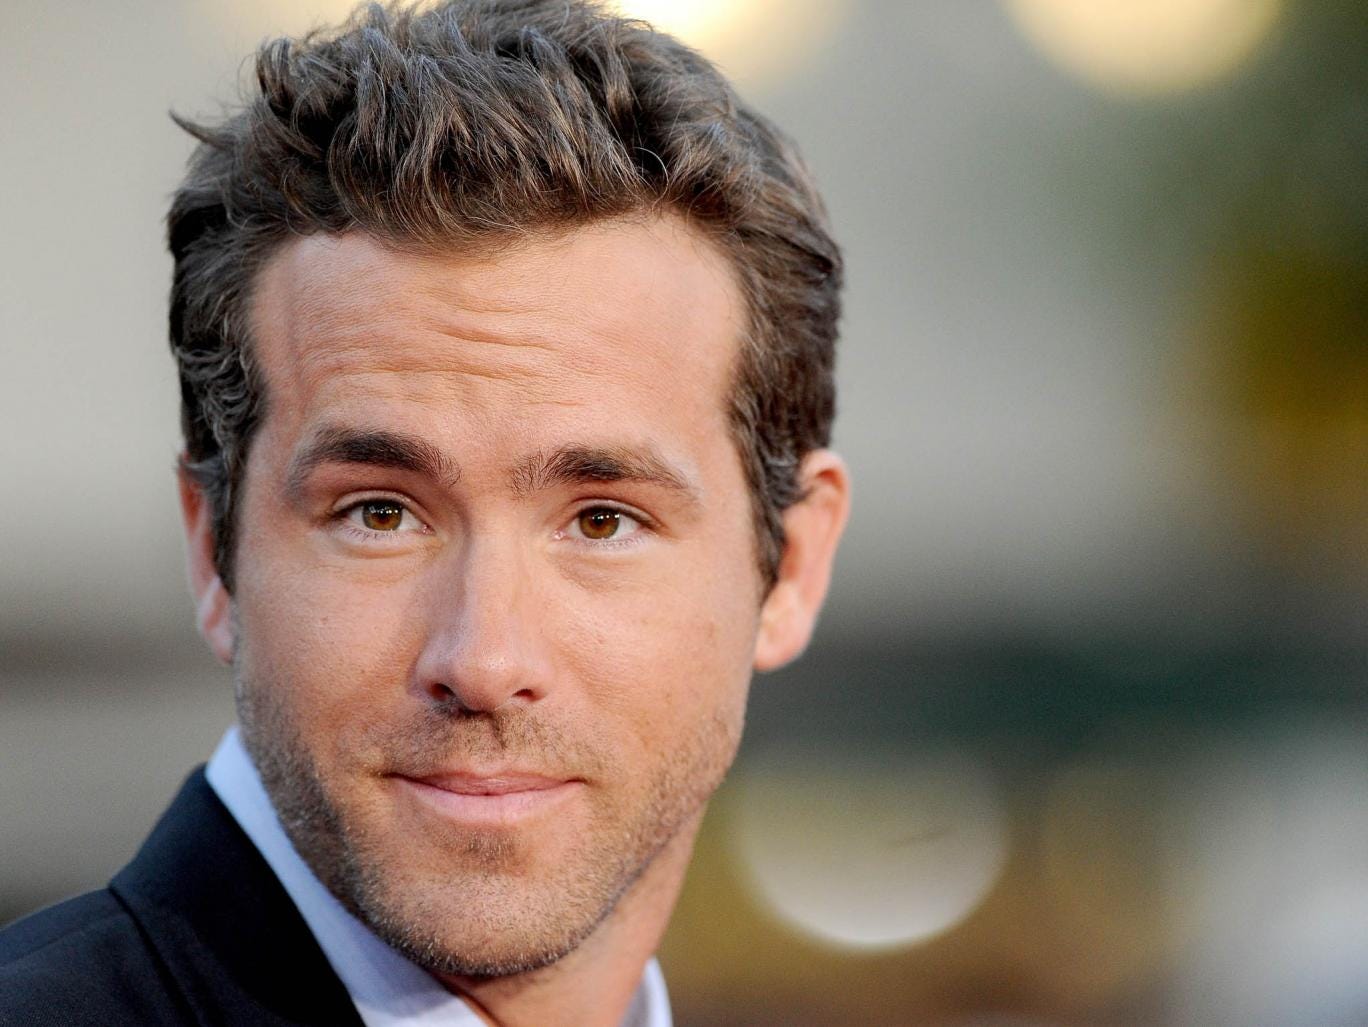 Actor Ryan Reynolds returns $10.70 at the box office for every dollar he receives. He looks set to rise up the over-paid list after his movie &#039;R.I.P.D&#039; became one of 2013&#039;s biggest flops after Forbes&#039; research deadline. 